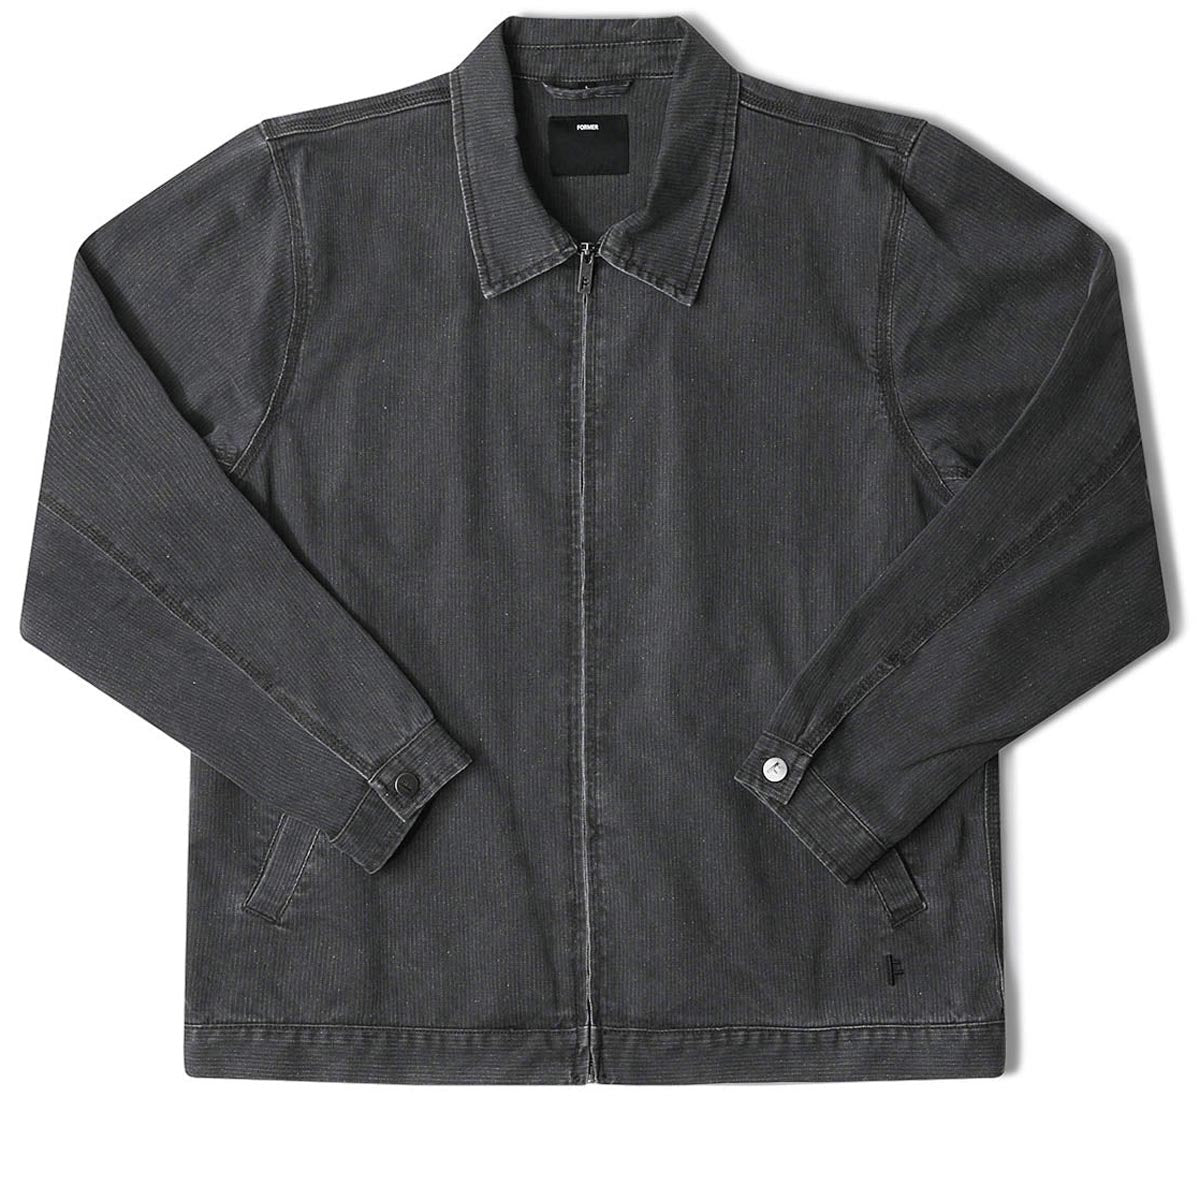 Former Distend Jacket - Char Pin image 5